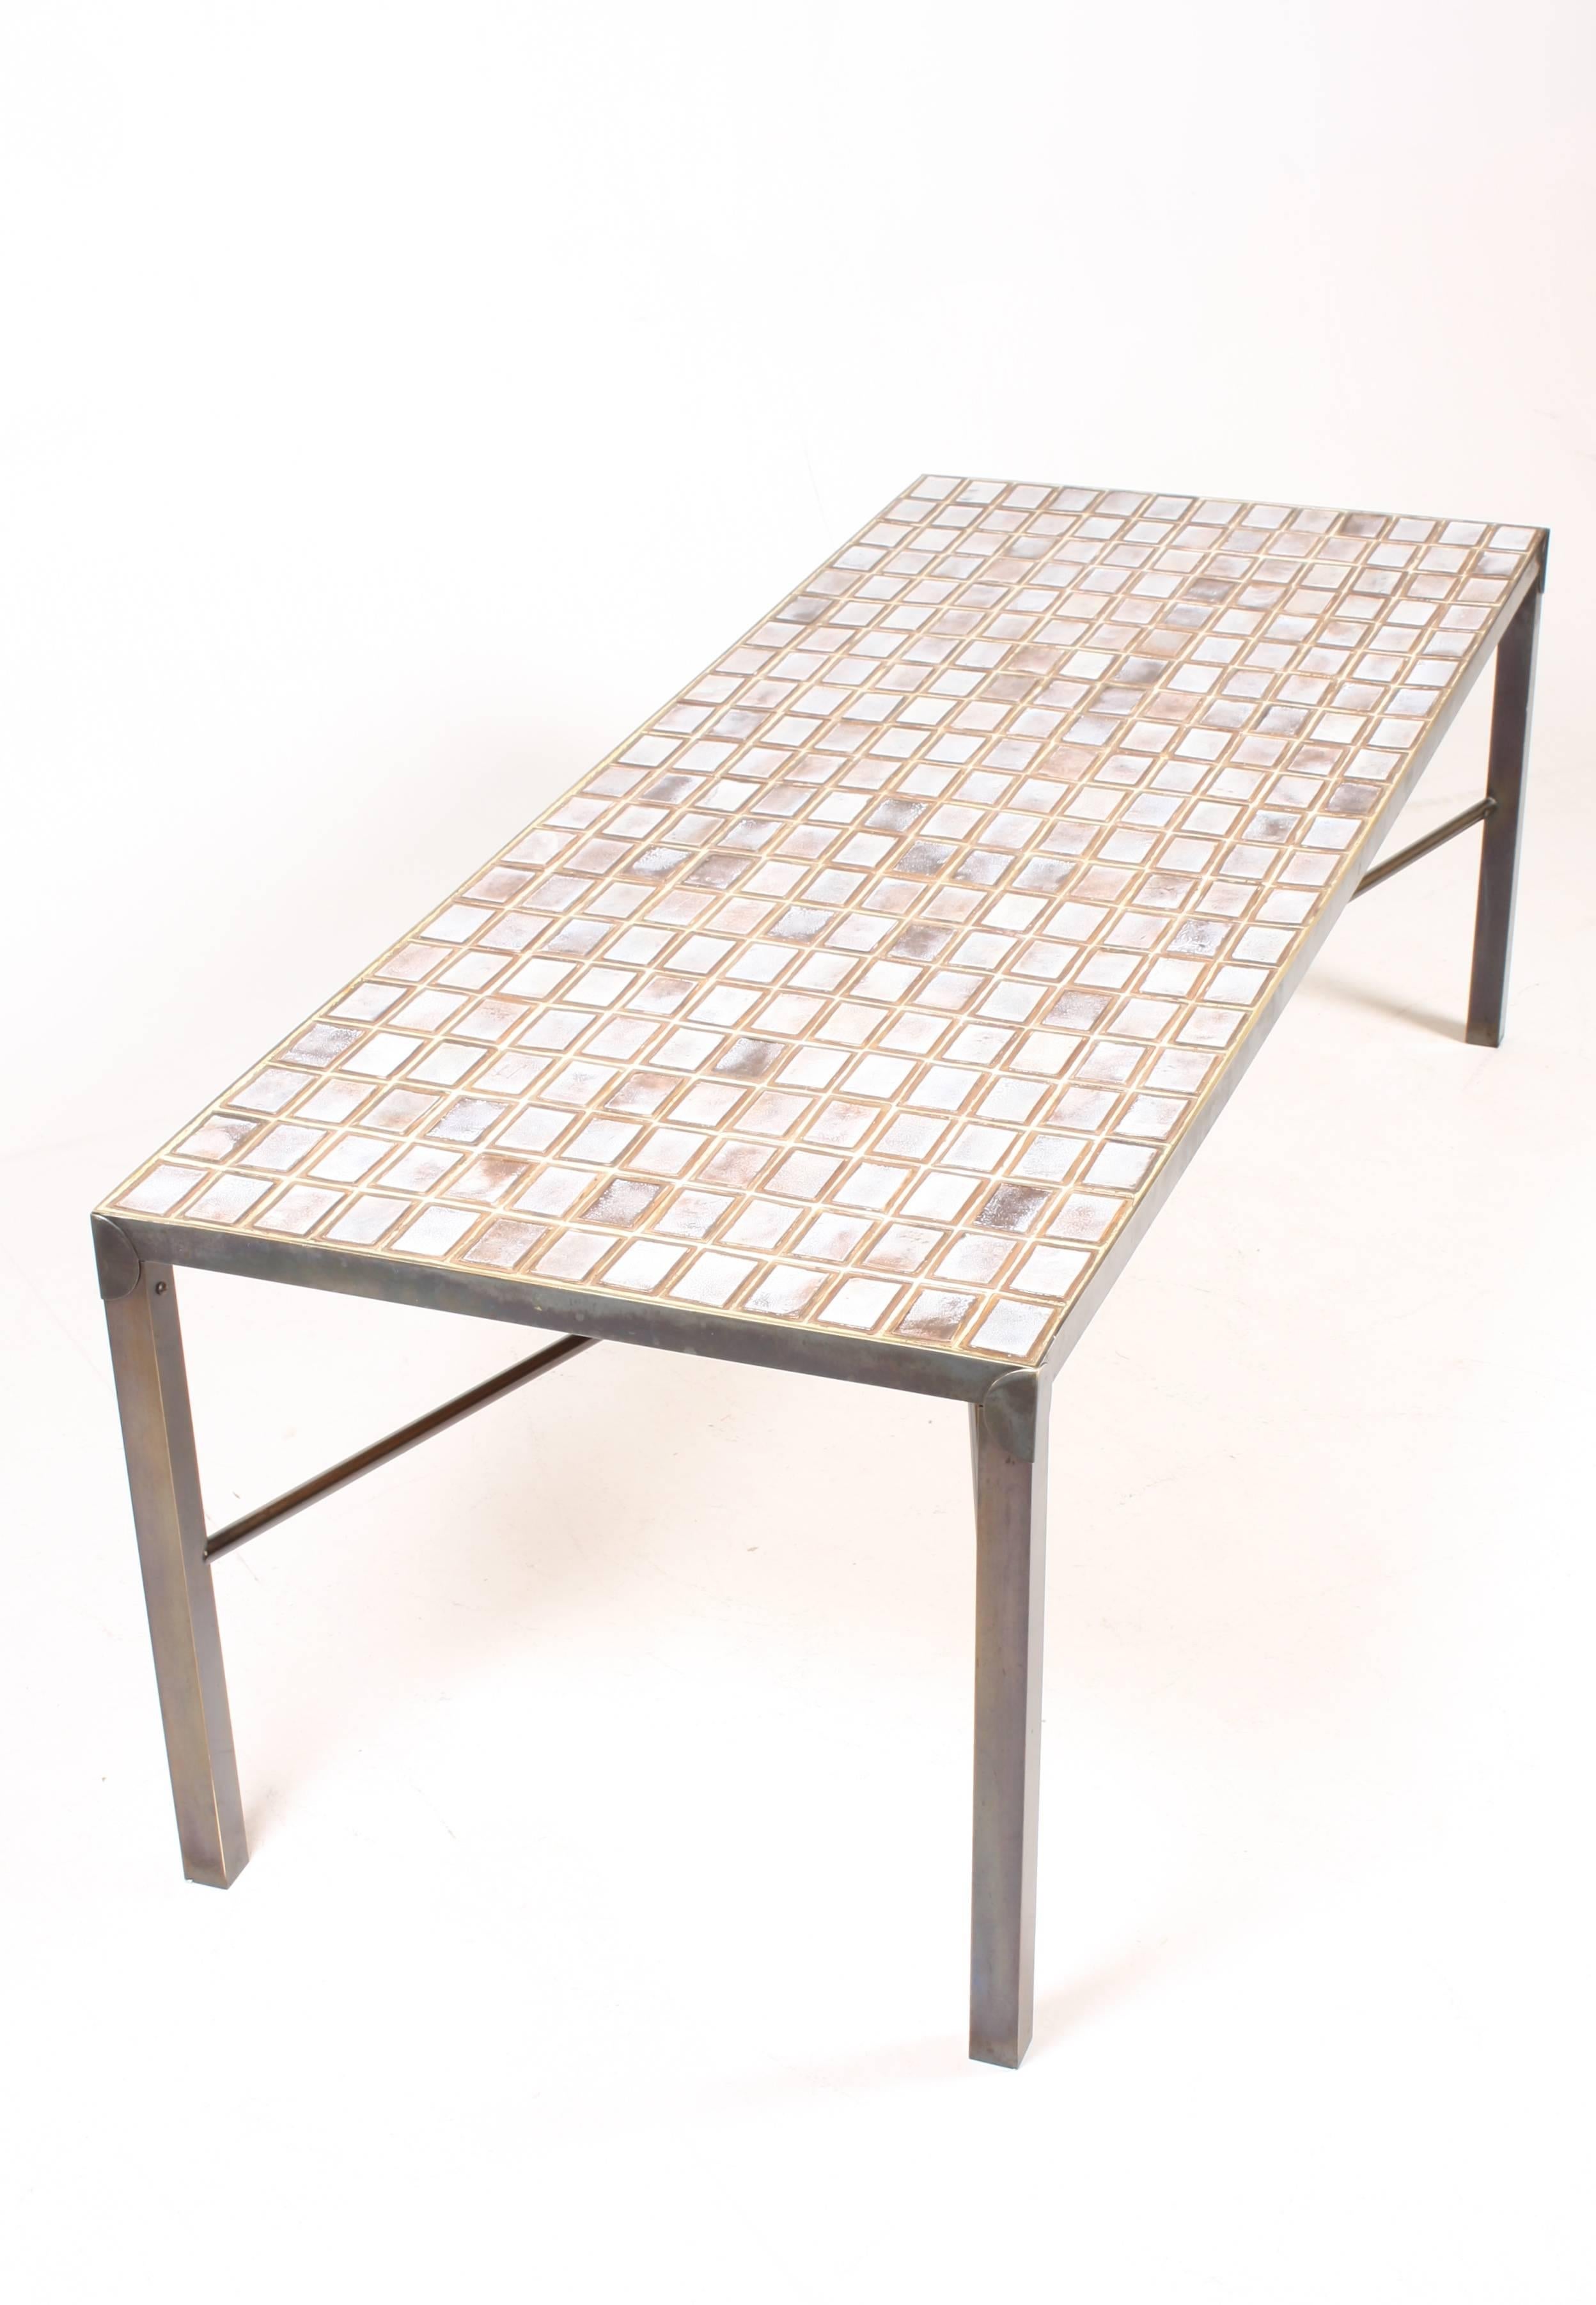 Low table, handmade ceramic tiles on an brass base. Made in Denmark in the 1970s. Great condition.